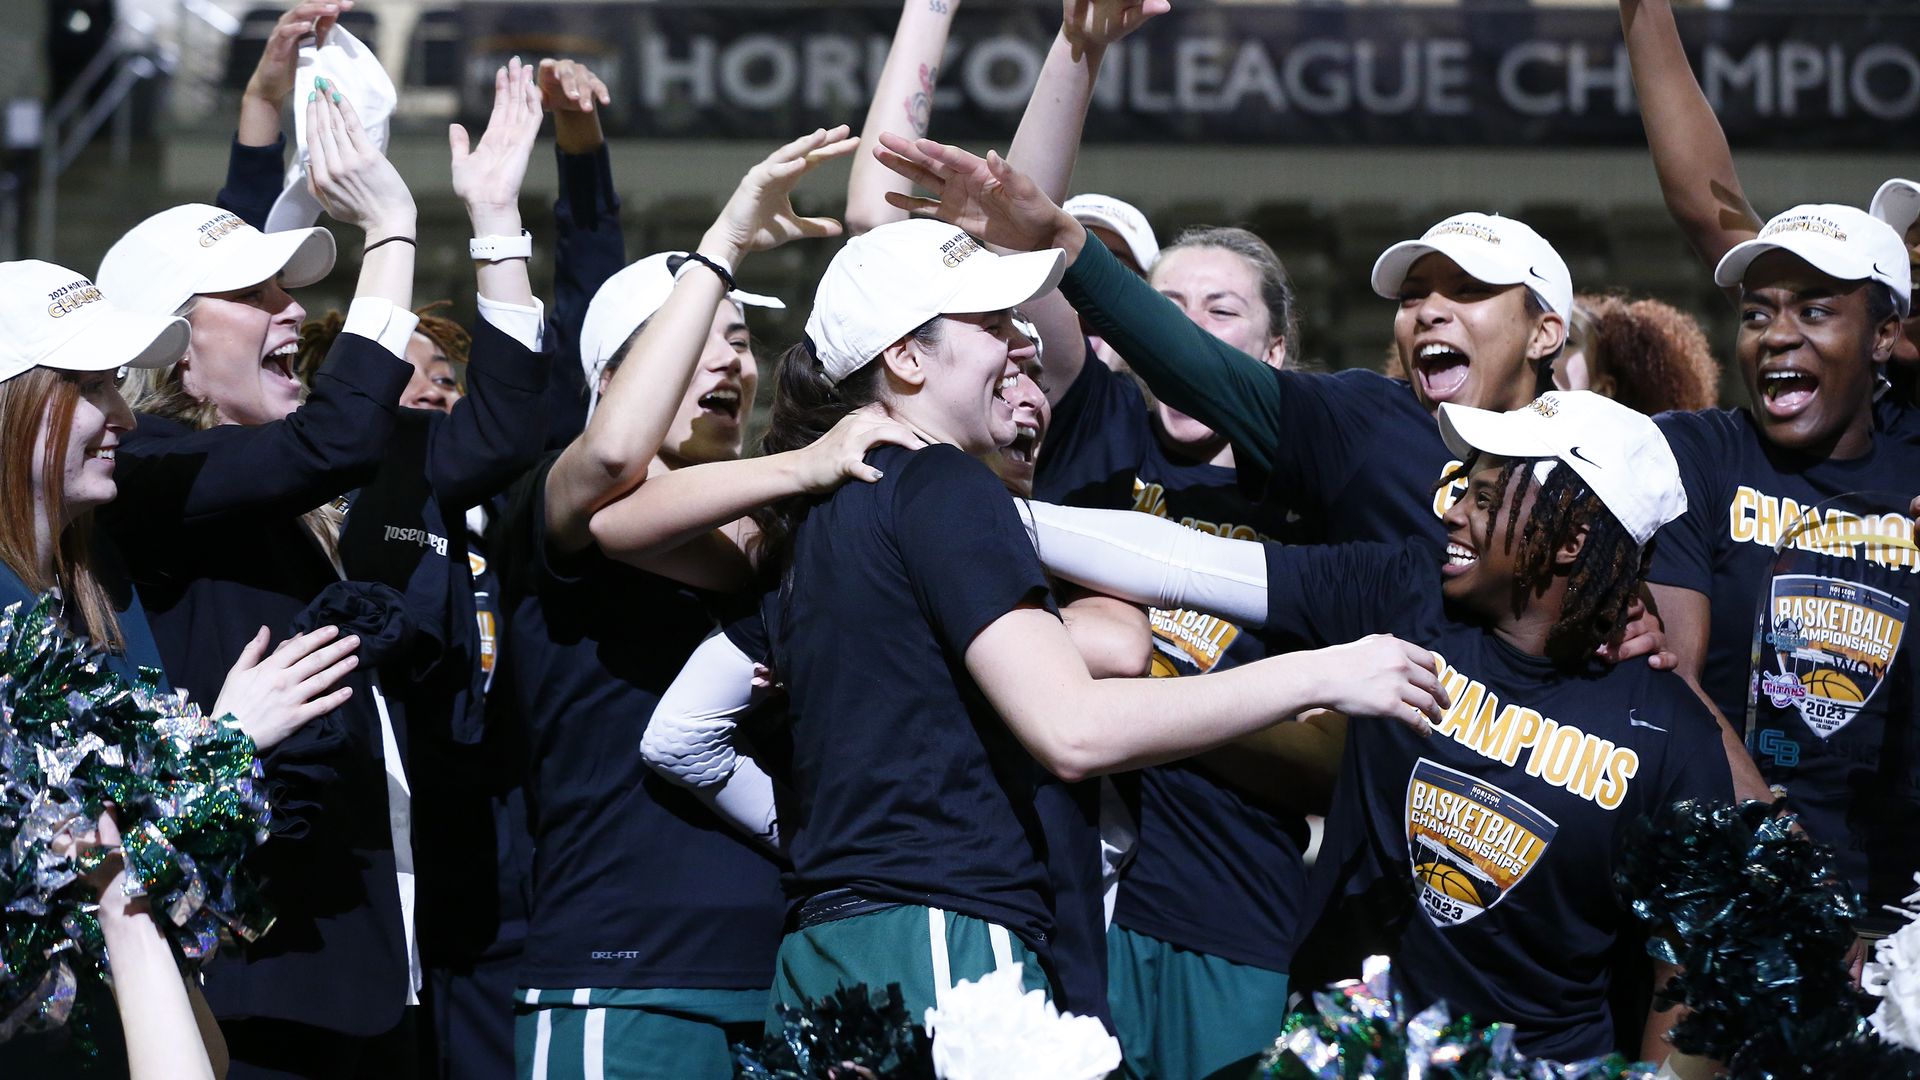 Members of the CSU women's basketball team celebrating, with white championship hats on